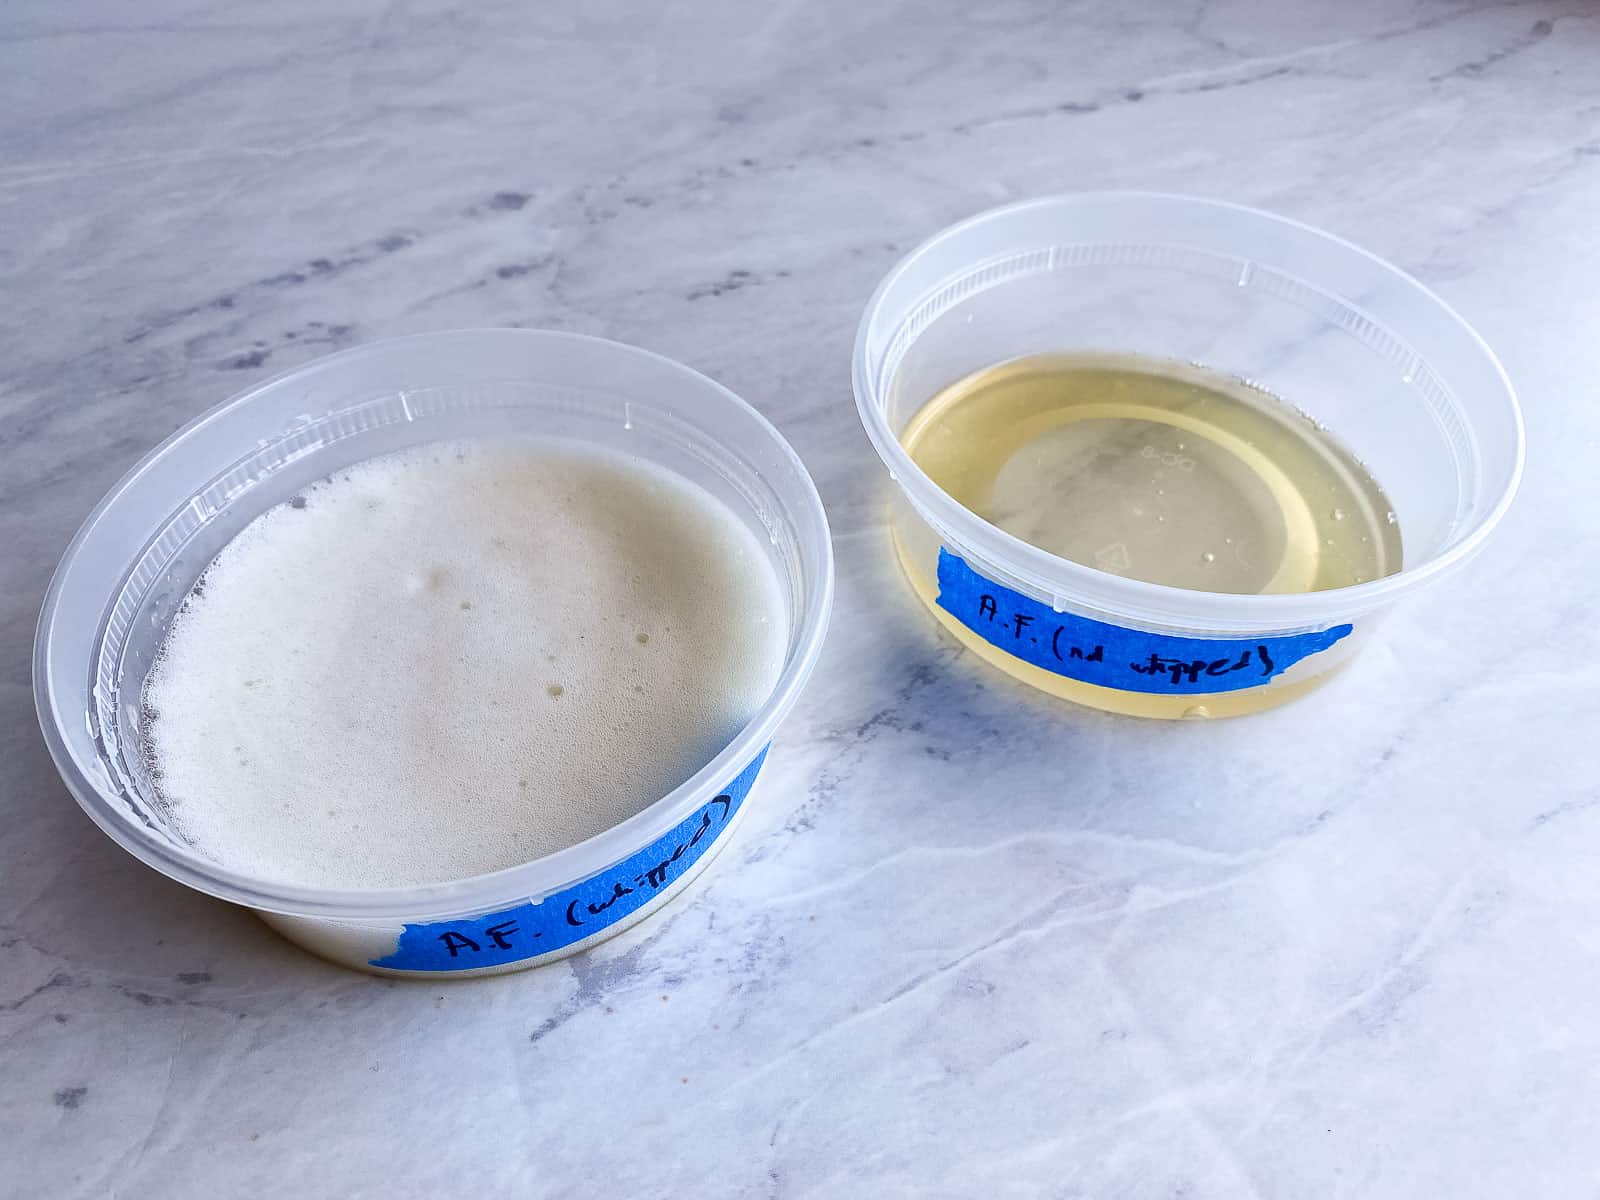 whipped vs. non-whipped aquafaba side by side